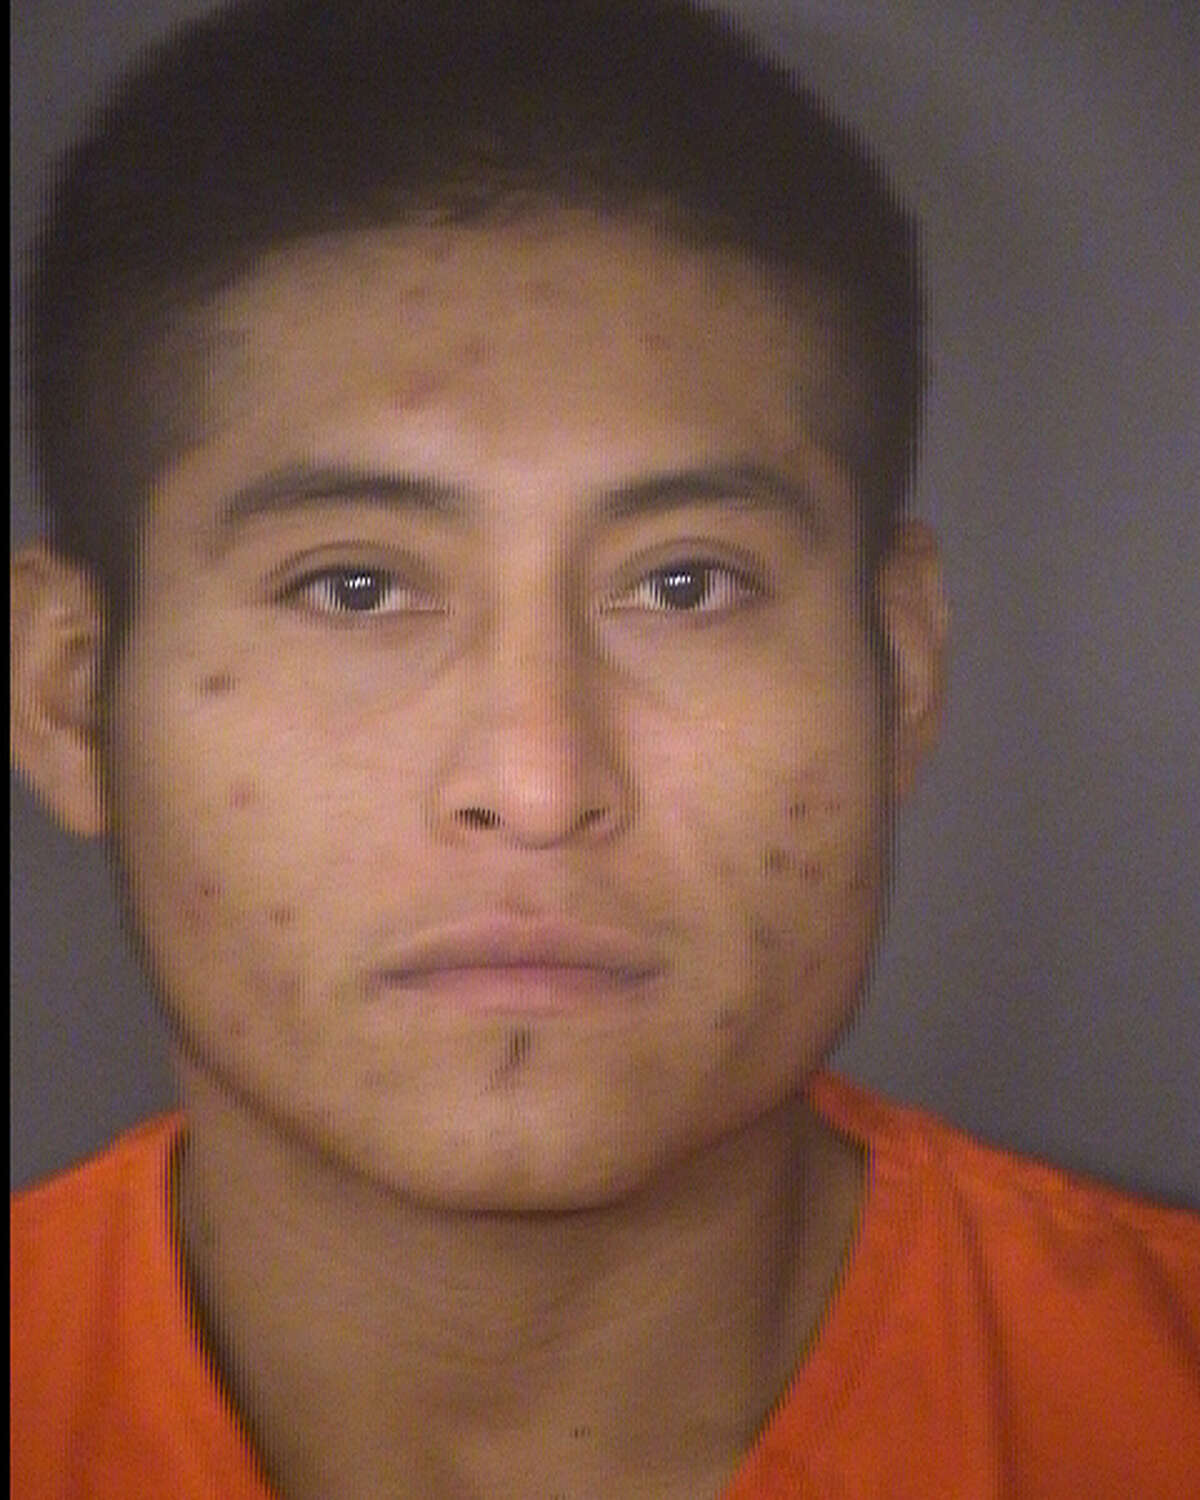 Nicolas Ambros Cagal now faces a third-degree felony charge of stalking. He was booked into the Bexar County Jail on Tuesday, and he's being held on an immigration detainer.